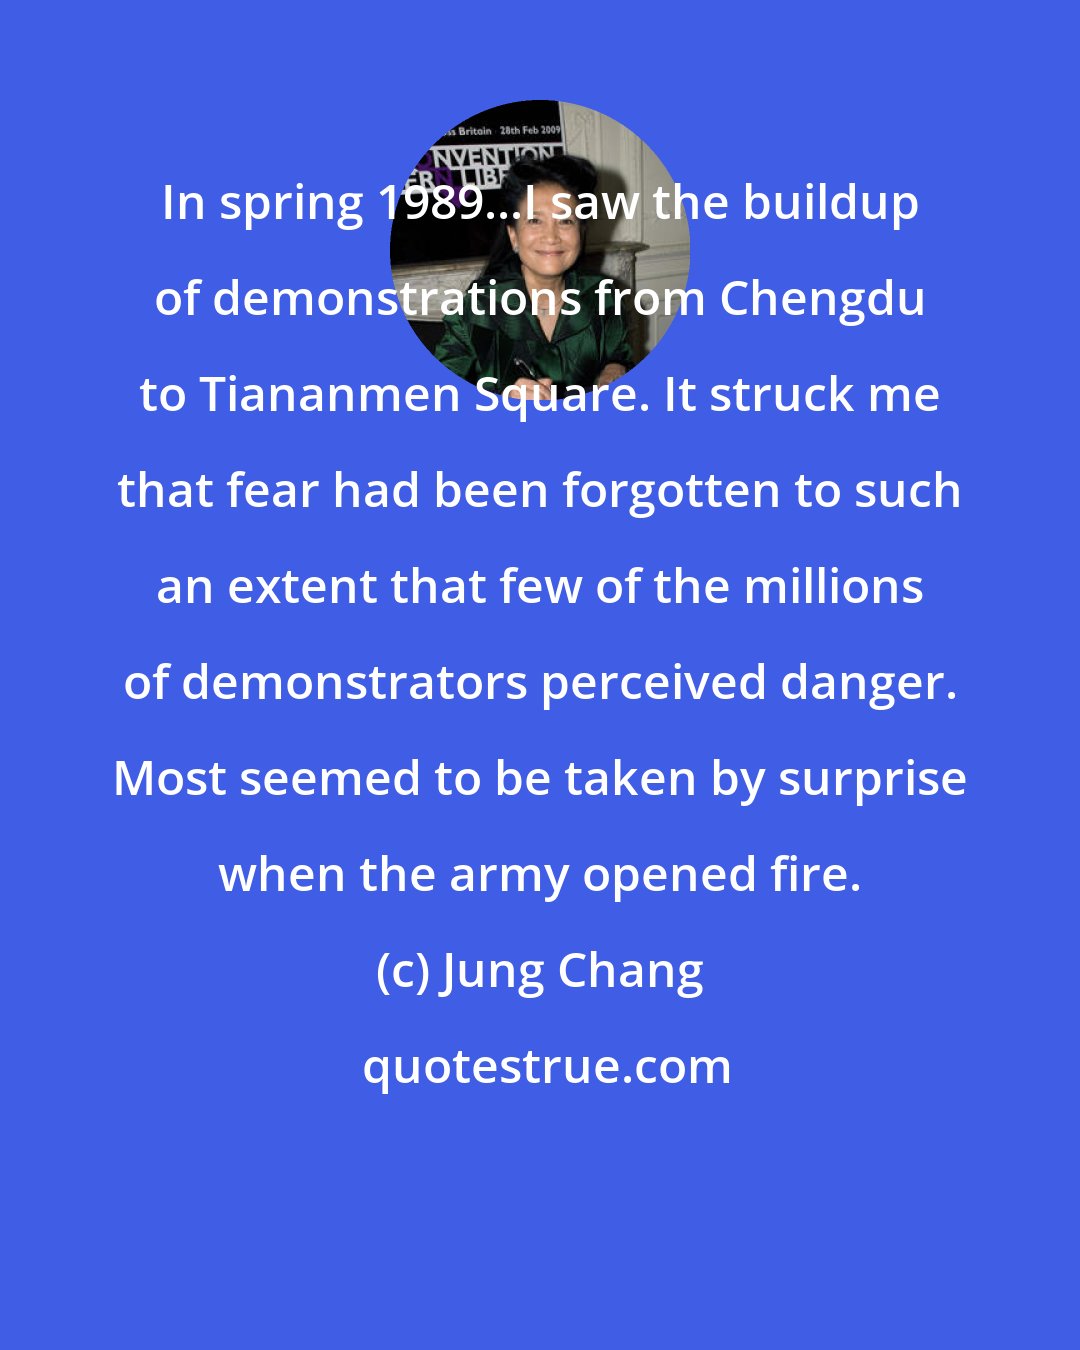 Jung Chang: In spring 1989...I saw the buildup of demonstrations from Chengdu to Tiananmen Square. It struck me that fear had been forgotten to such an extent that few of the millions of demonstrators perceived danger. Most seemed to be taken by surprise when the army opened fire.